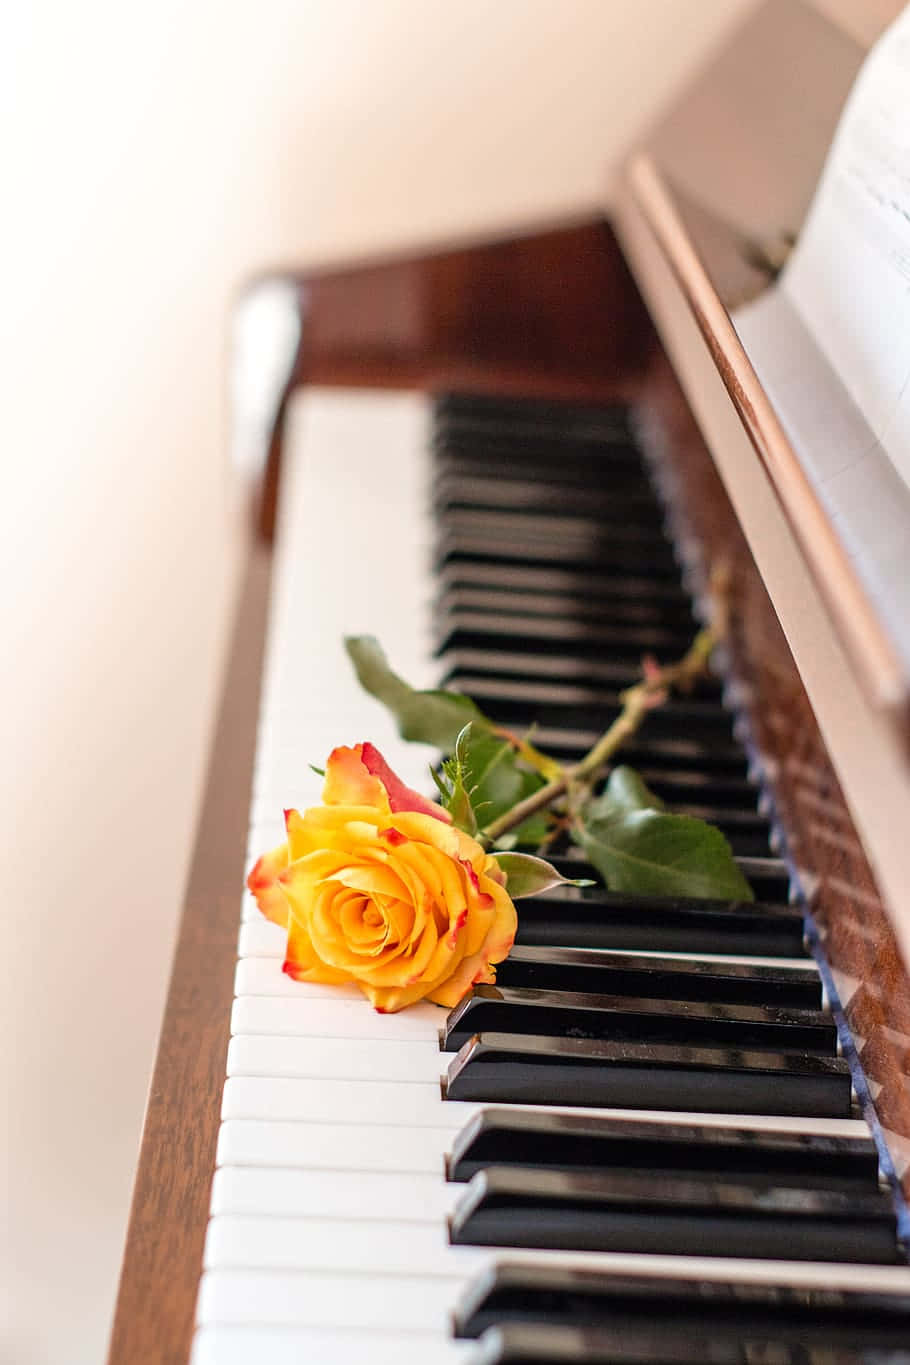 Musical Instrument Piano With Rose Picture